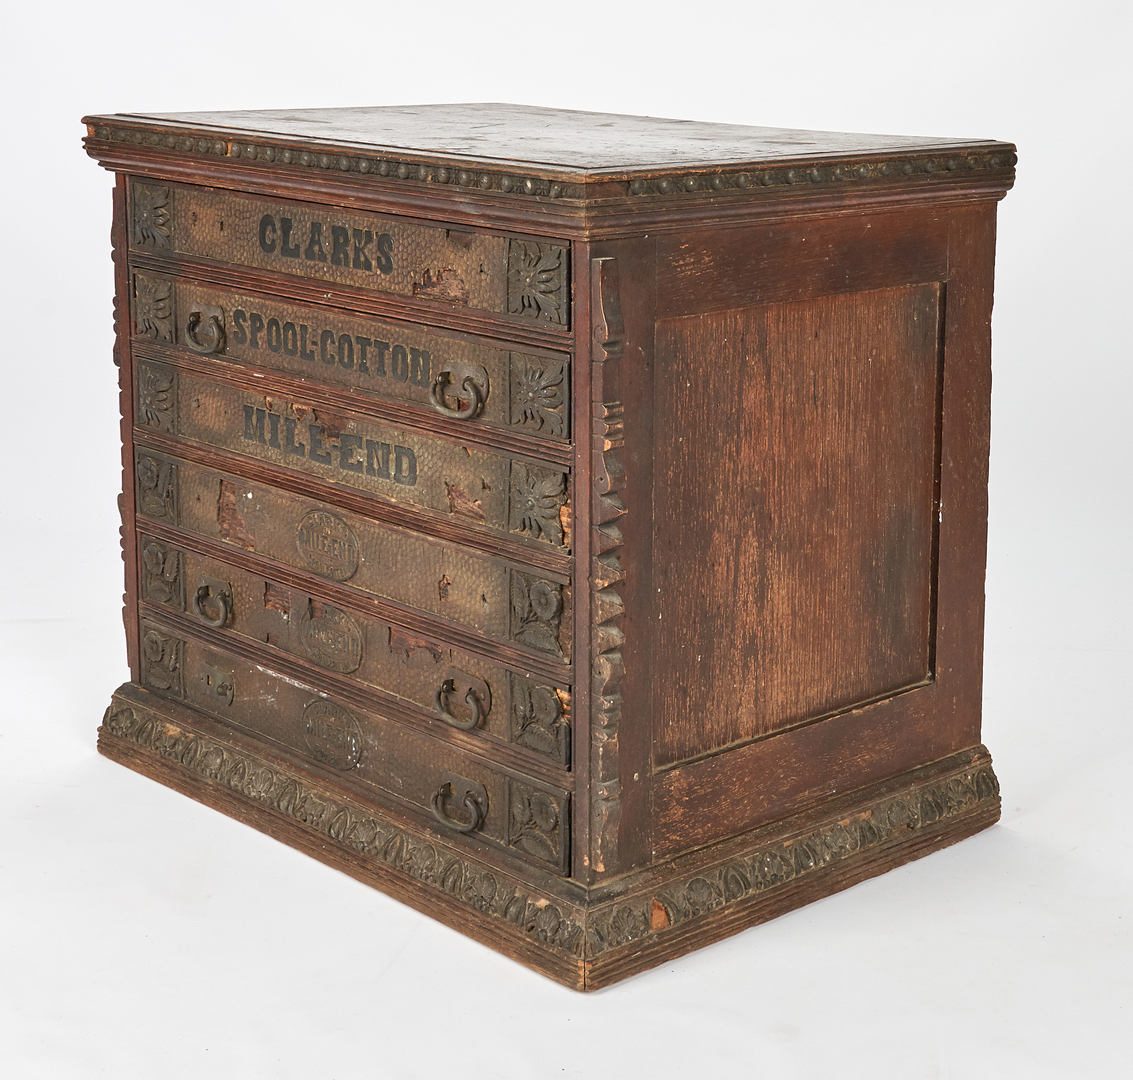 Lot 892: 2 Mercantile Spool Cabinets, incl. Clark's Advertising